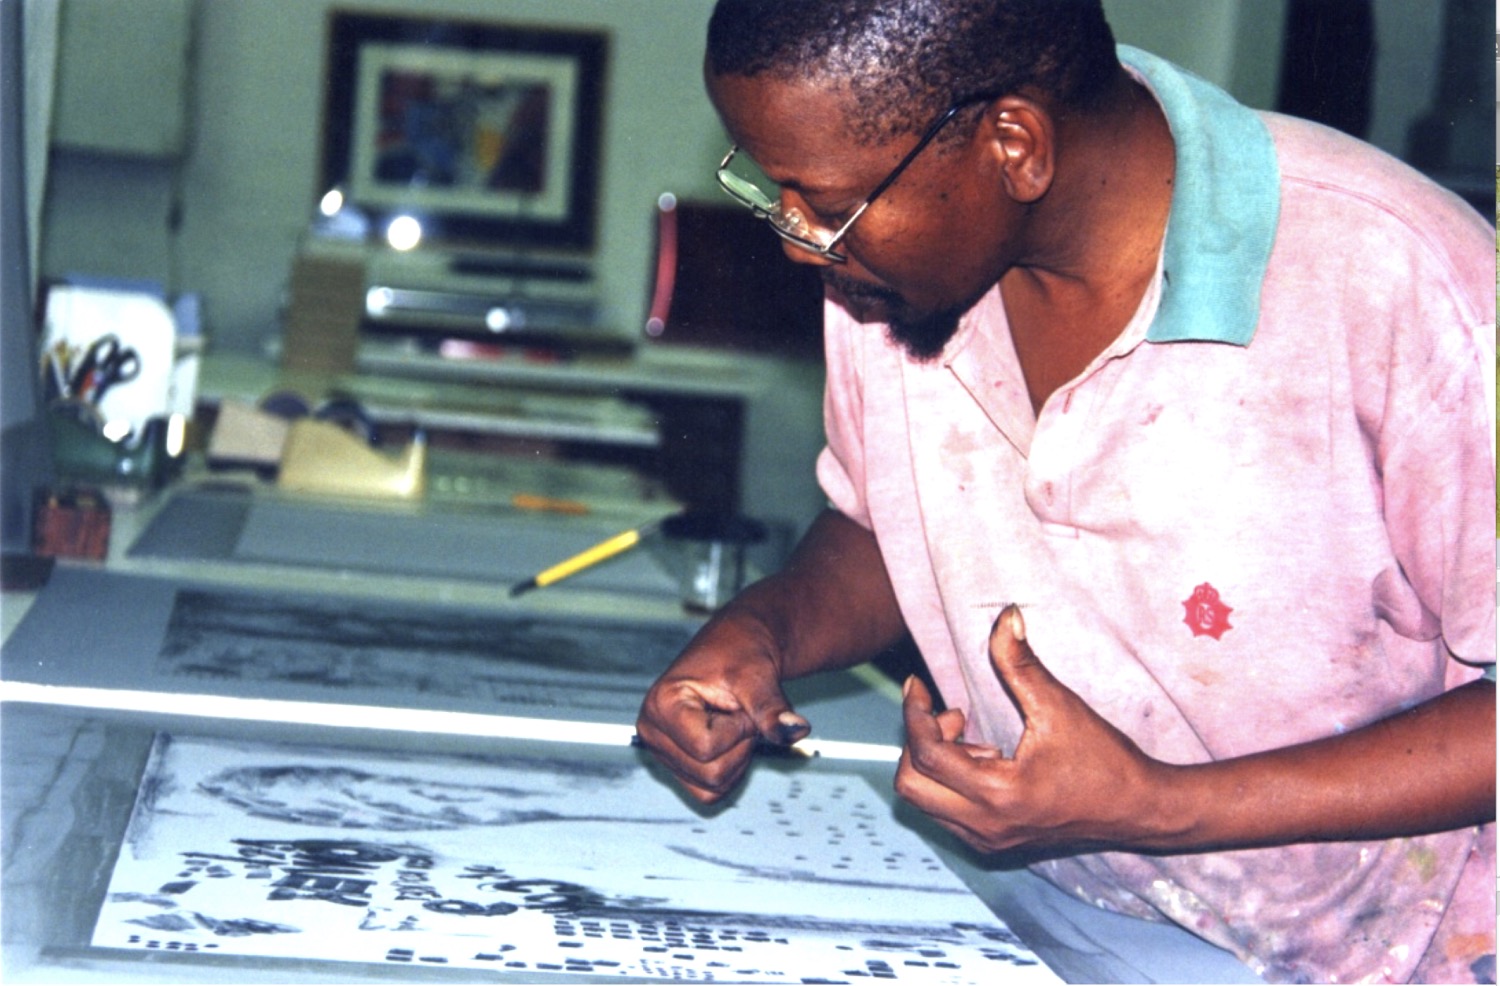 Lithographs by Kagiso Patrick Mautloa done in collaboration with The Artists' Press at The Bag Factory.